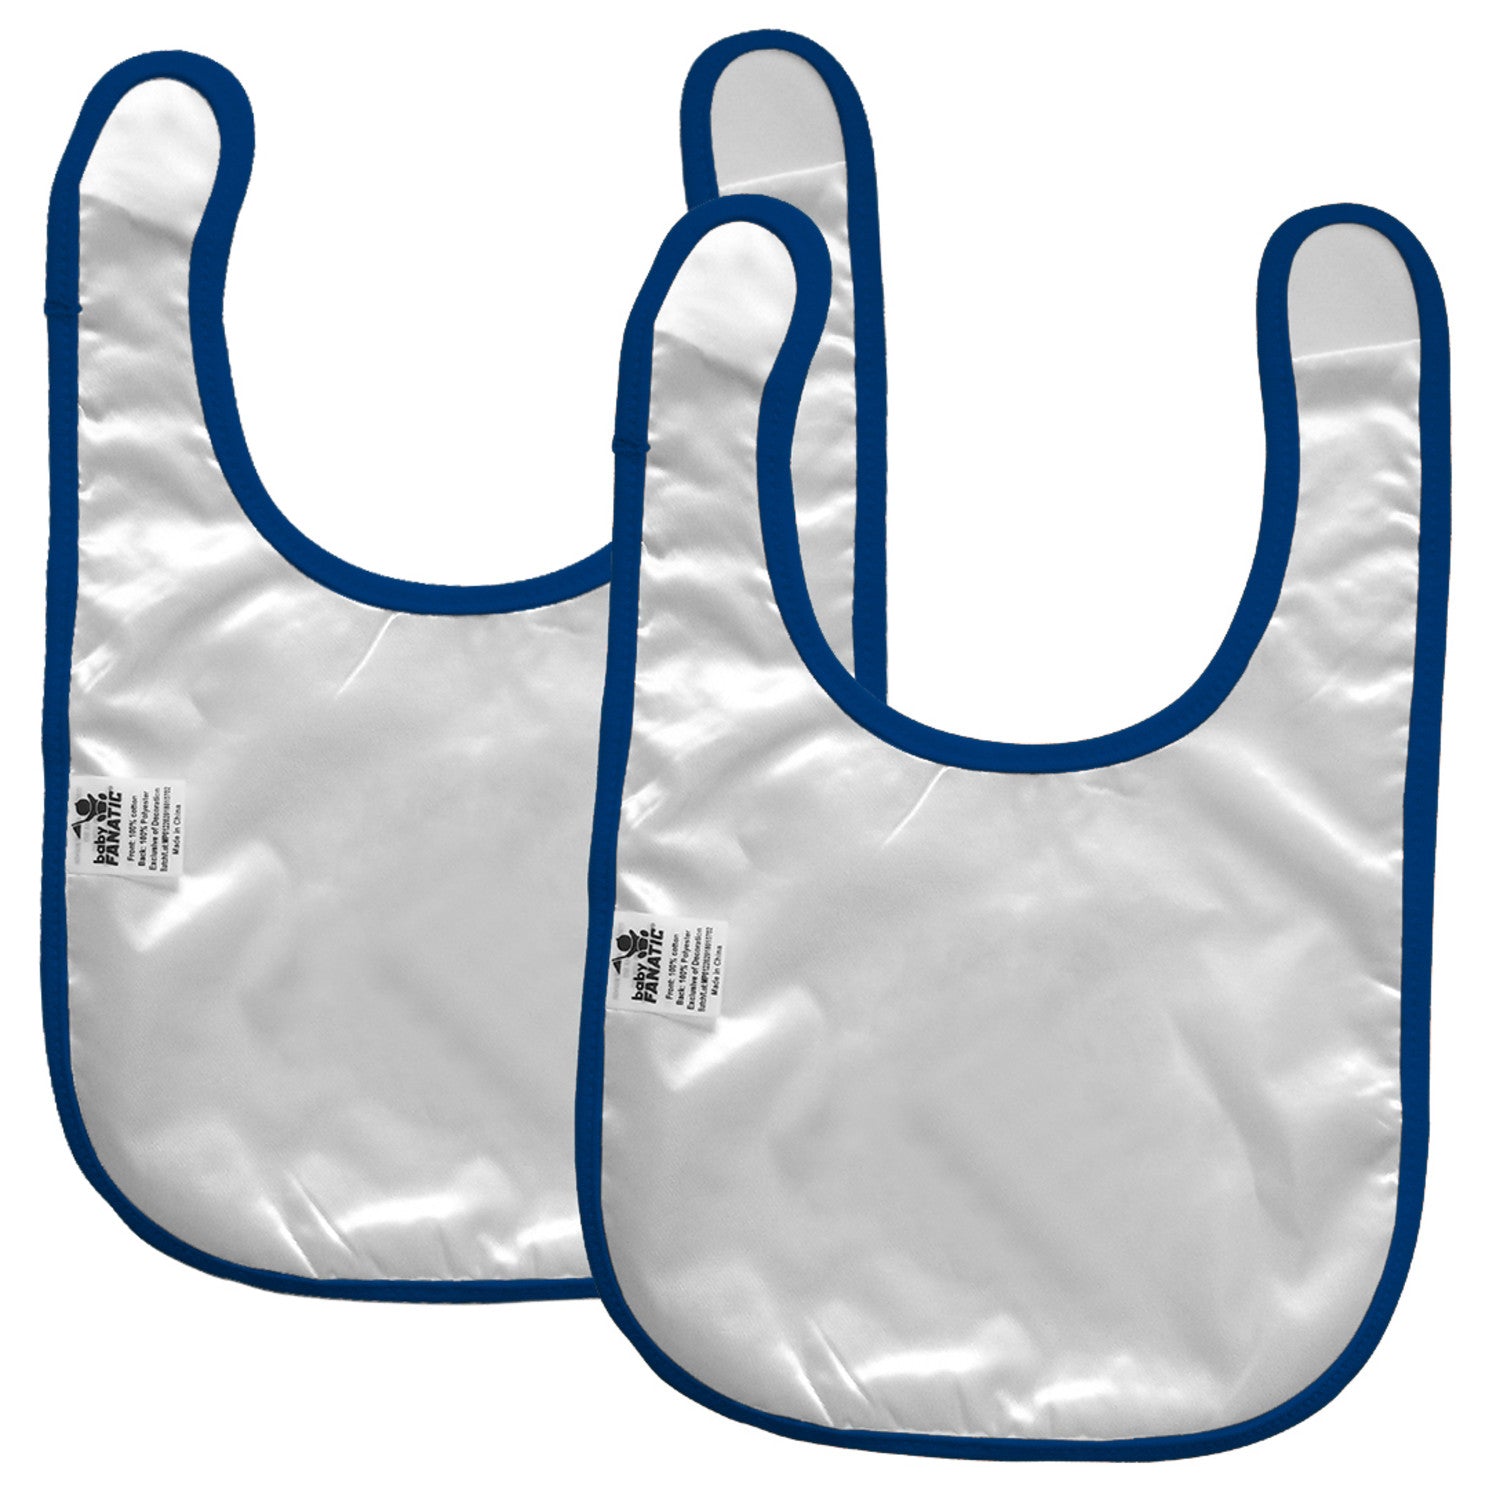 Indianapolis Colts NFL Baby Bibs 2-Pack